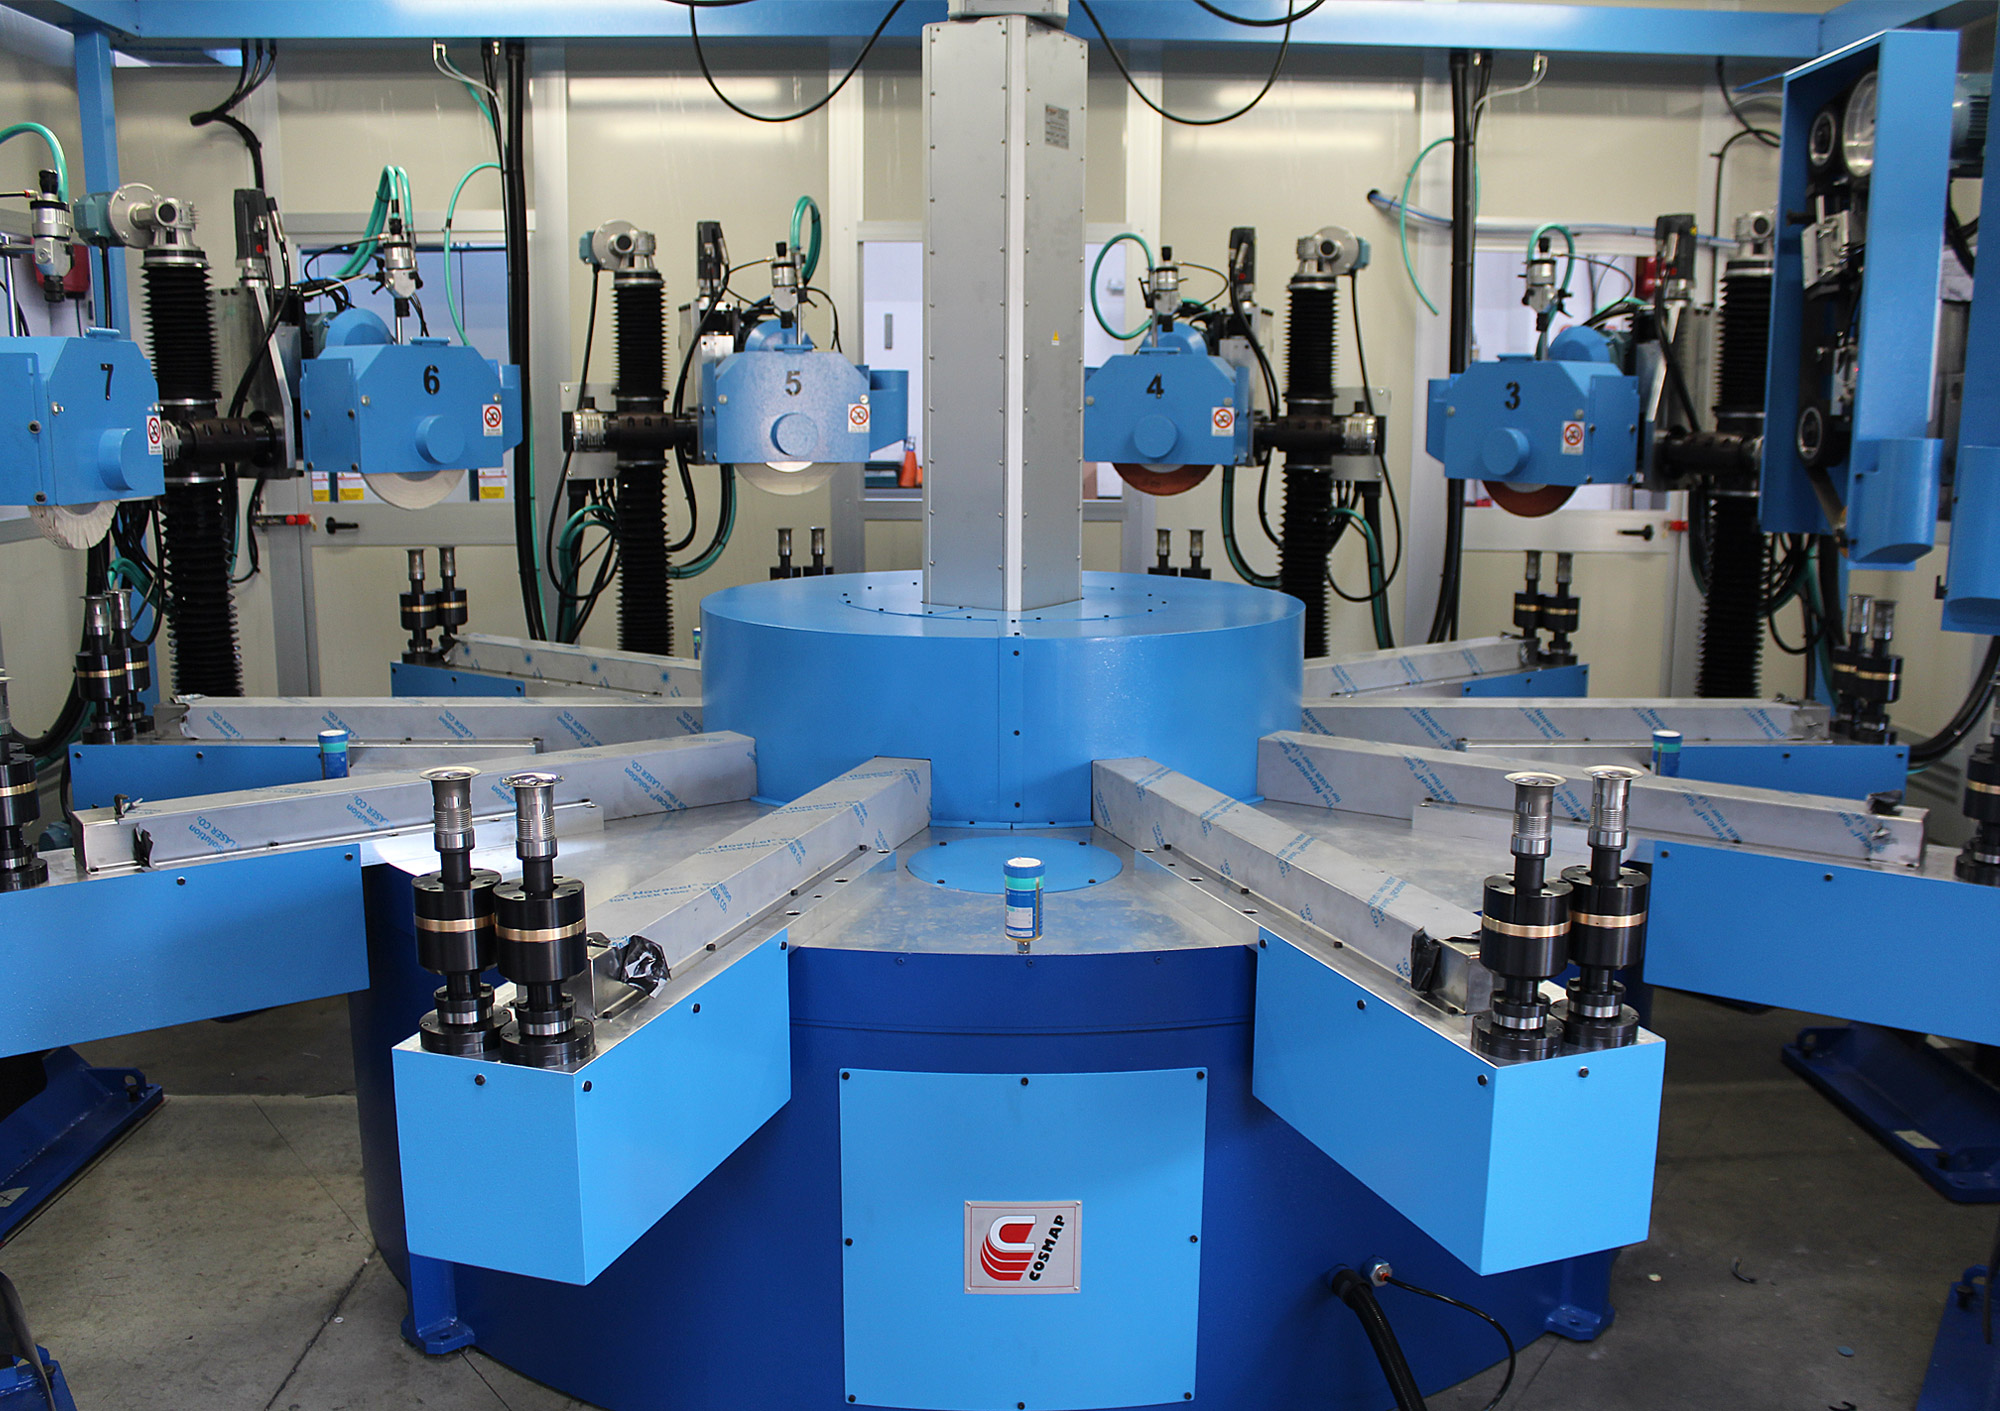 Indexed rotary table with C.S.L. type grinding/linishing unit and C.P.L. type polishing unit